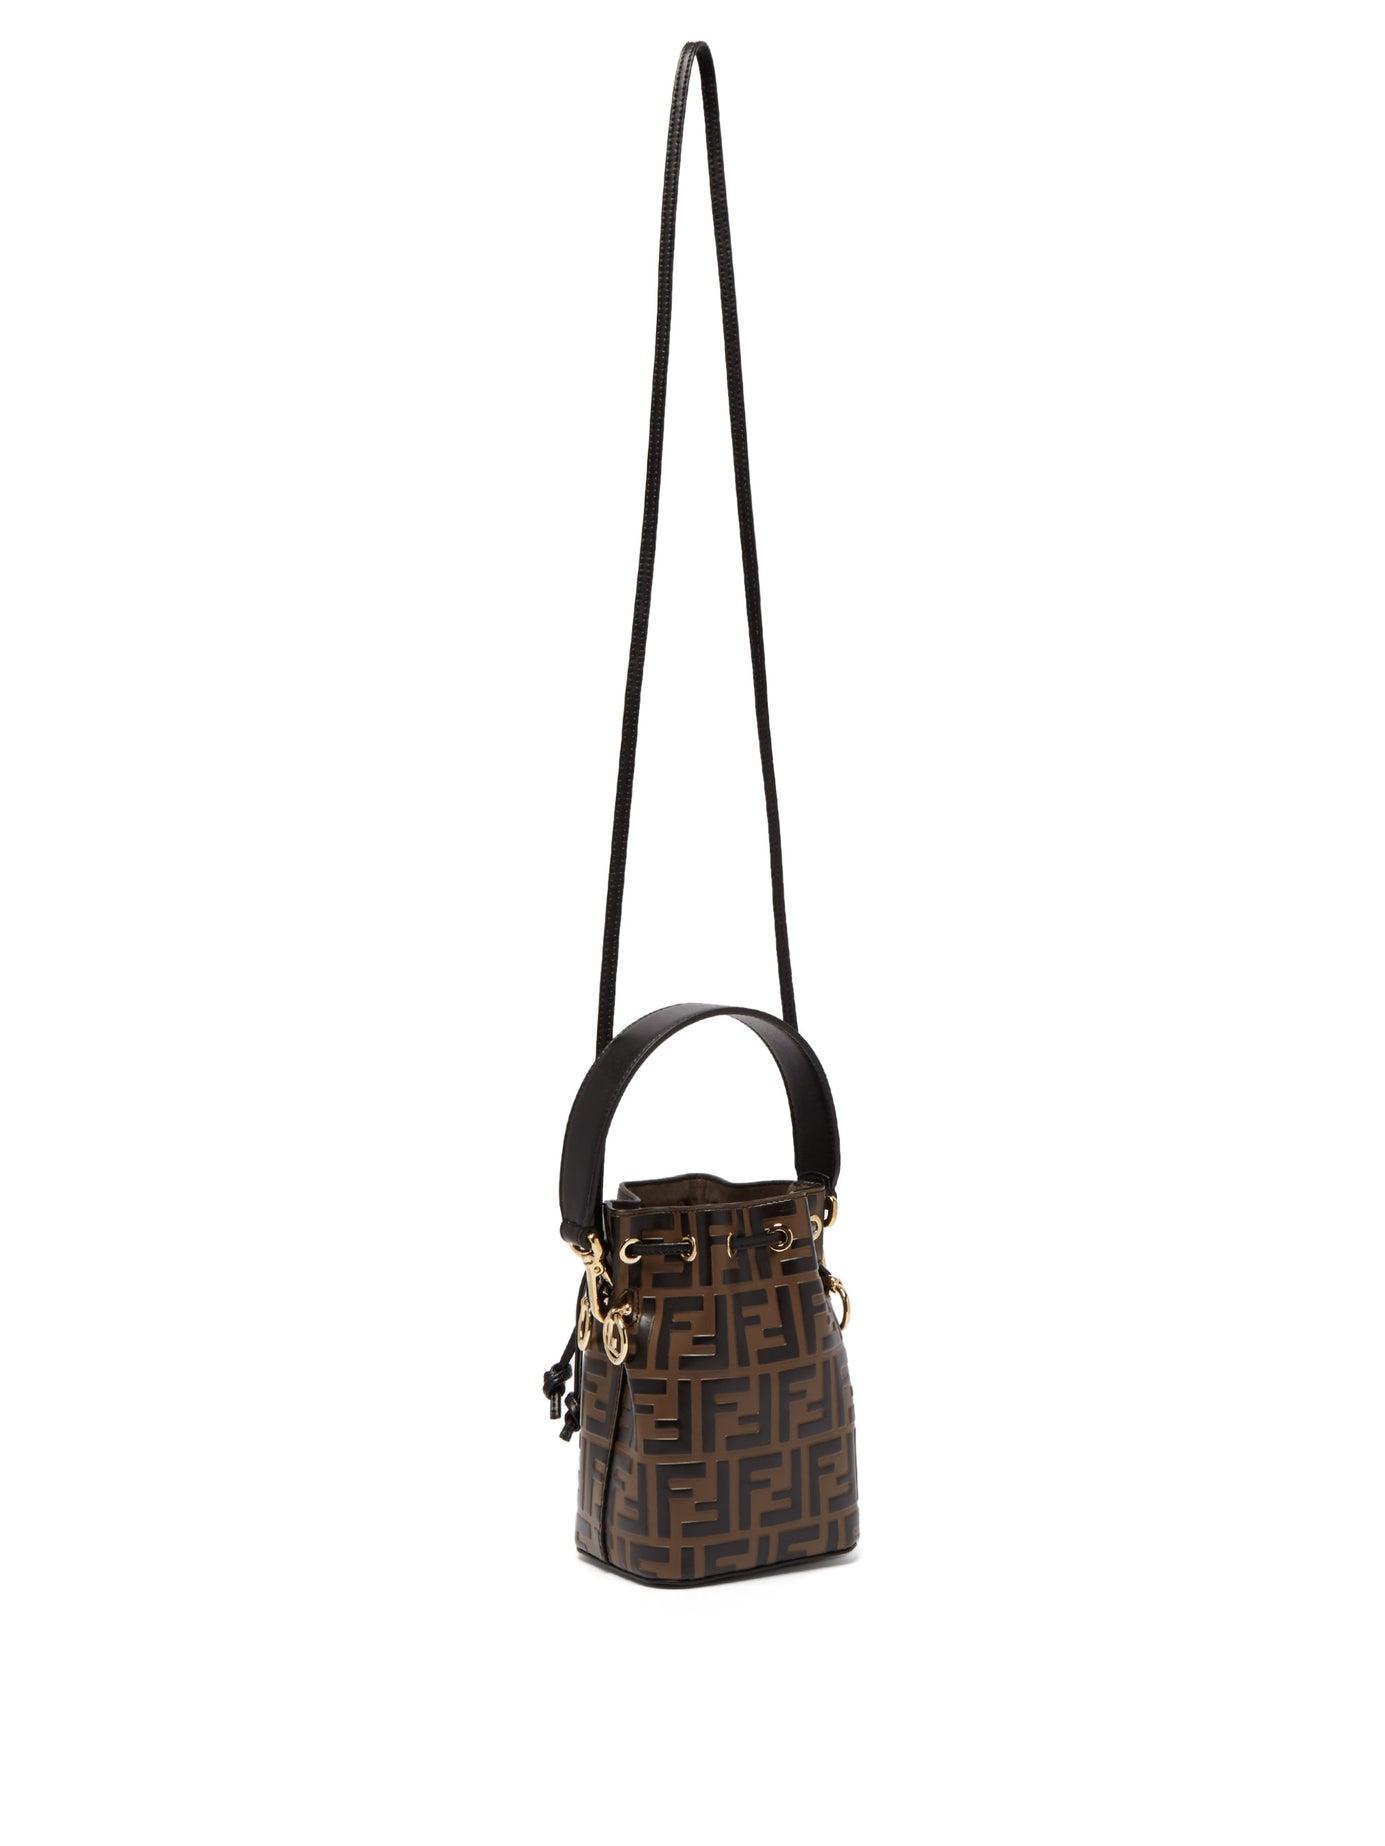 Garderobe - Fendi Brown/Black FF Mon Tresor Mini Drawstring Bucket Bag For  AED4,747/- Available Online and in Store DM us to Purchase Choose PostPay  at Checkout #garderobe #garderobedubai #fendi #luxurybags #luxury #preloved  #